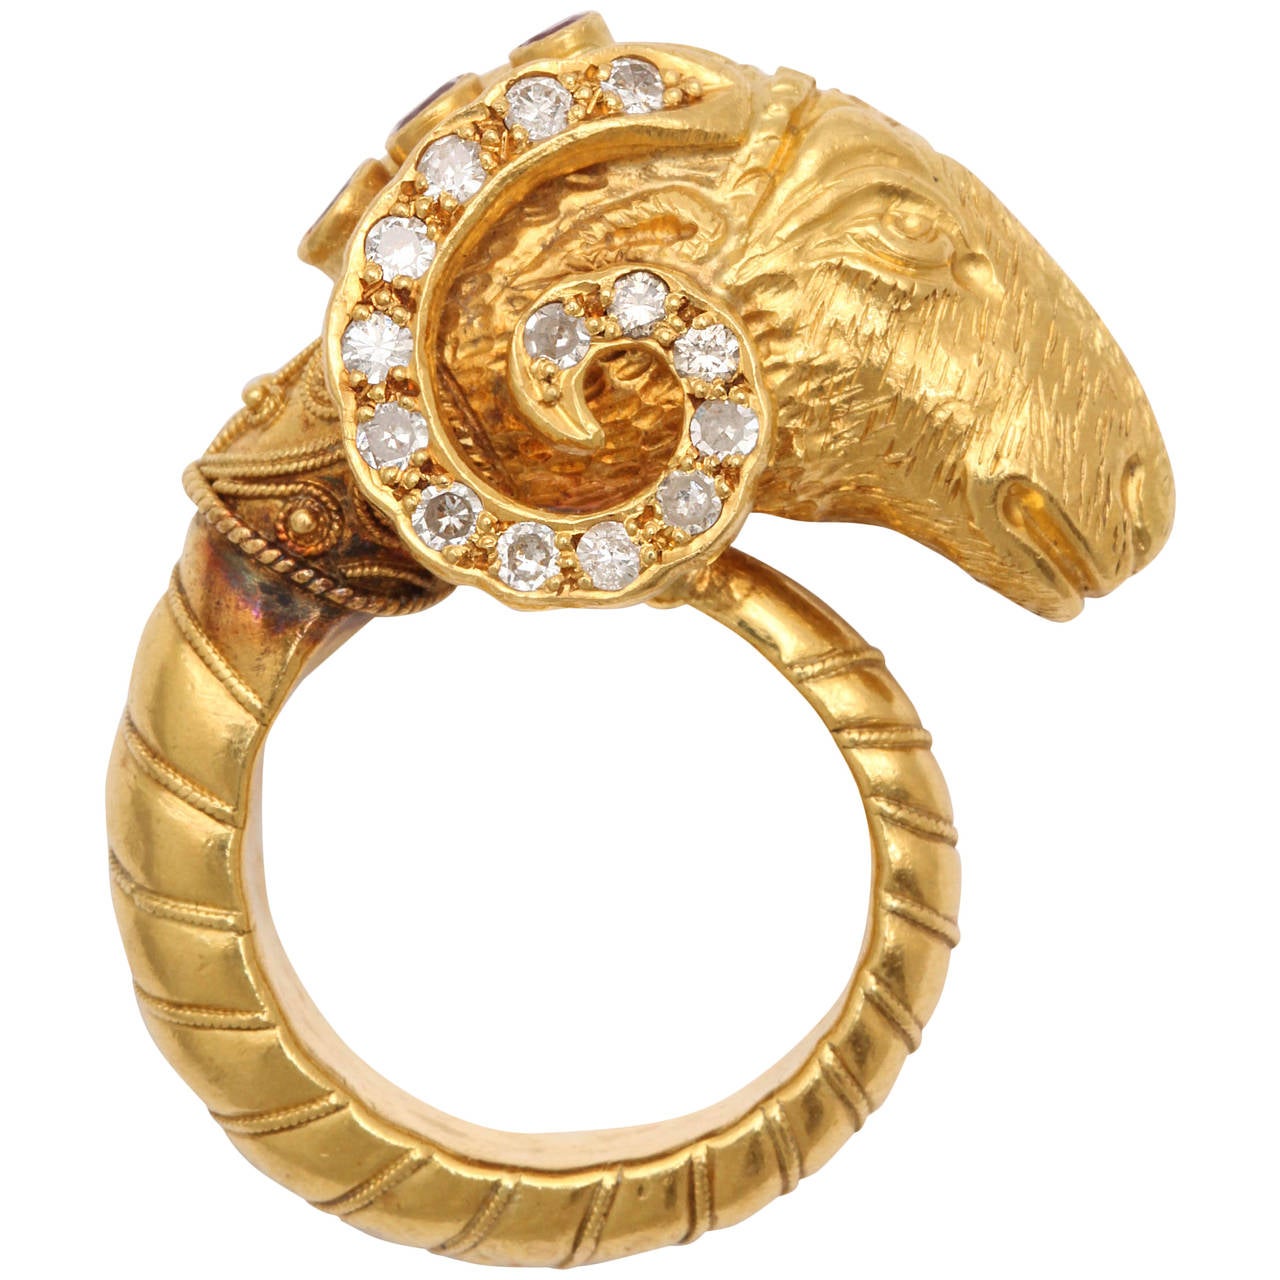 Etruscan Style Gold Ram's-Head Ring with Diamonds and Rubies For Sale ...